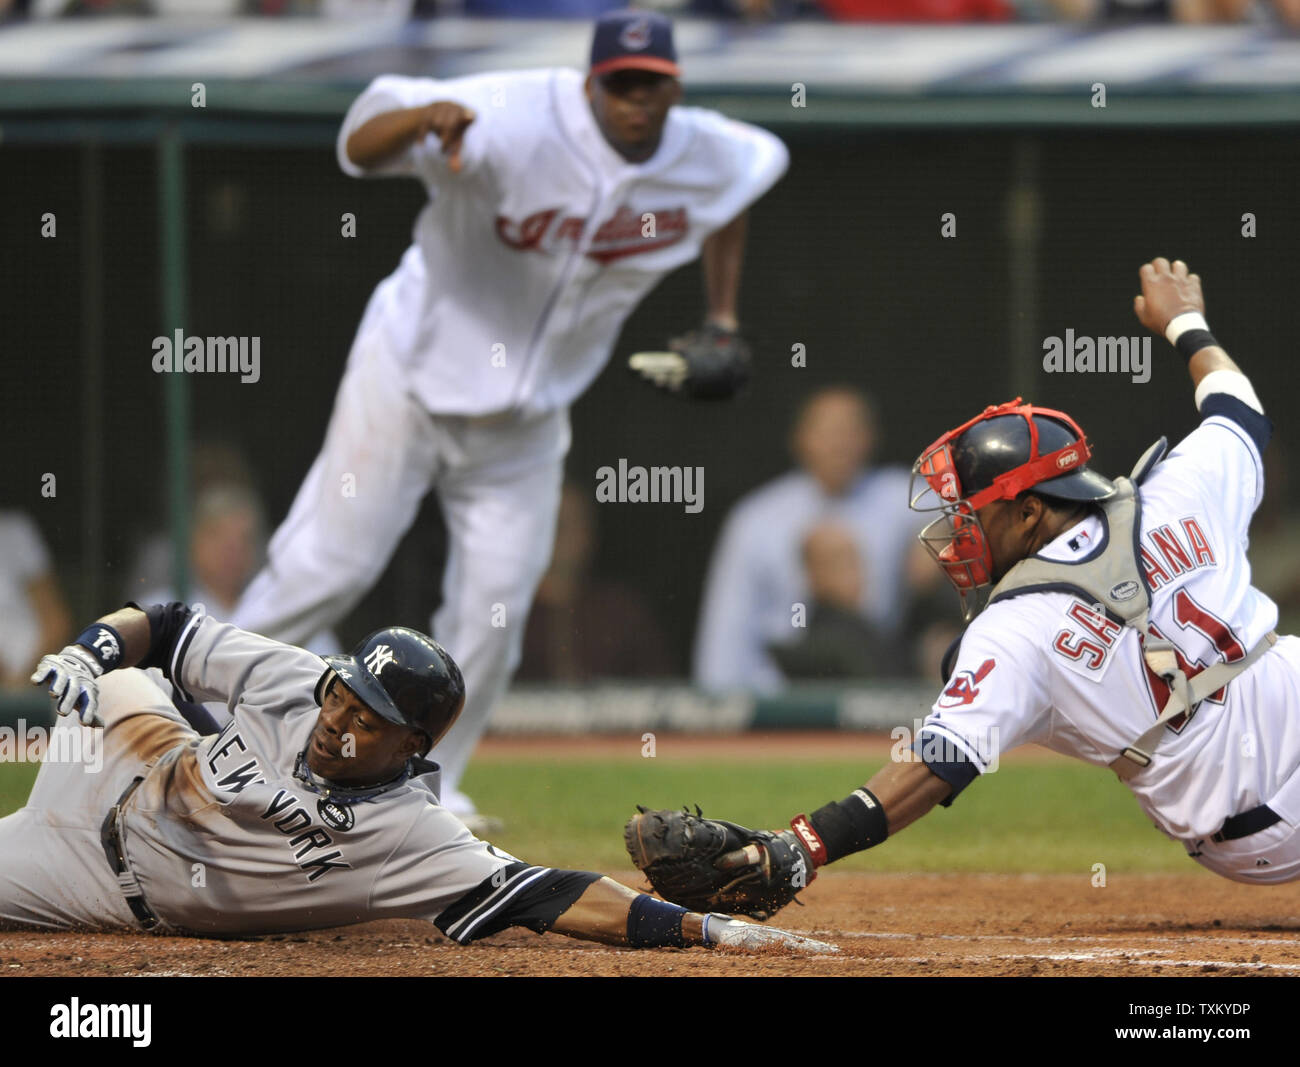 New York Yankees' Curtis Granderson, left, scores before a tag from Cleveland catcher Carlos Santana, right, as Cleveland pitcher Fausto Carmona watches in the second inning of a baseball game at Progressive Field in Cleveland on July 28, 2010.  UPI/David Richard Stock Photo